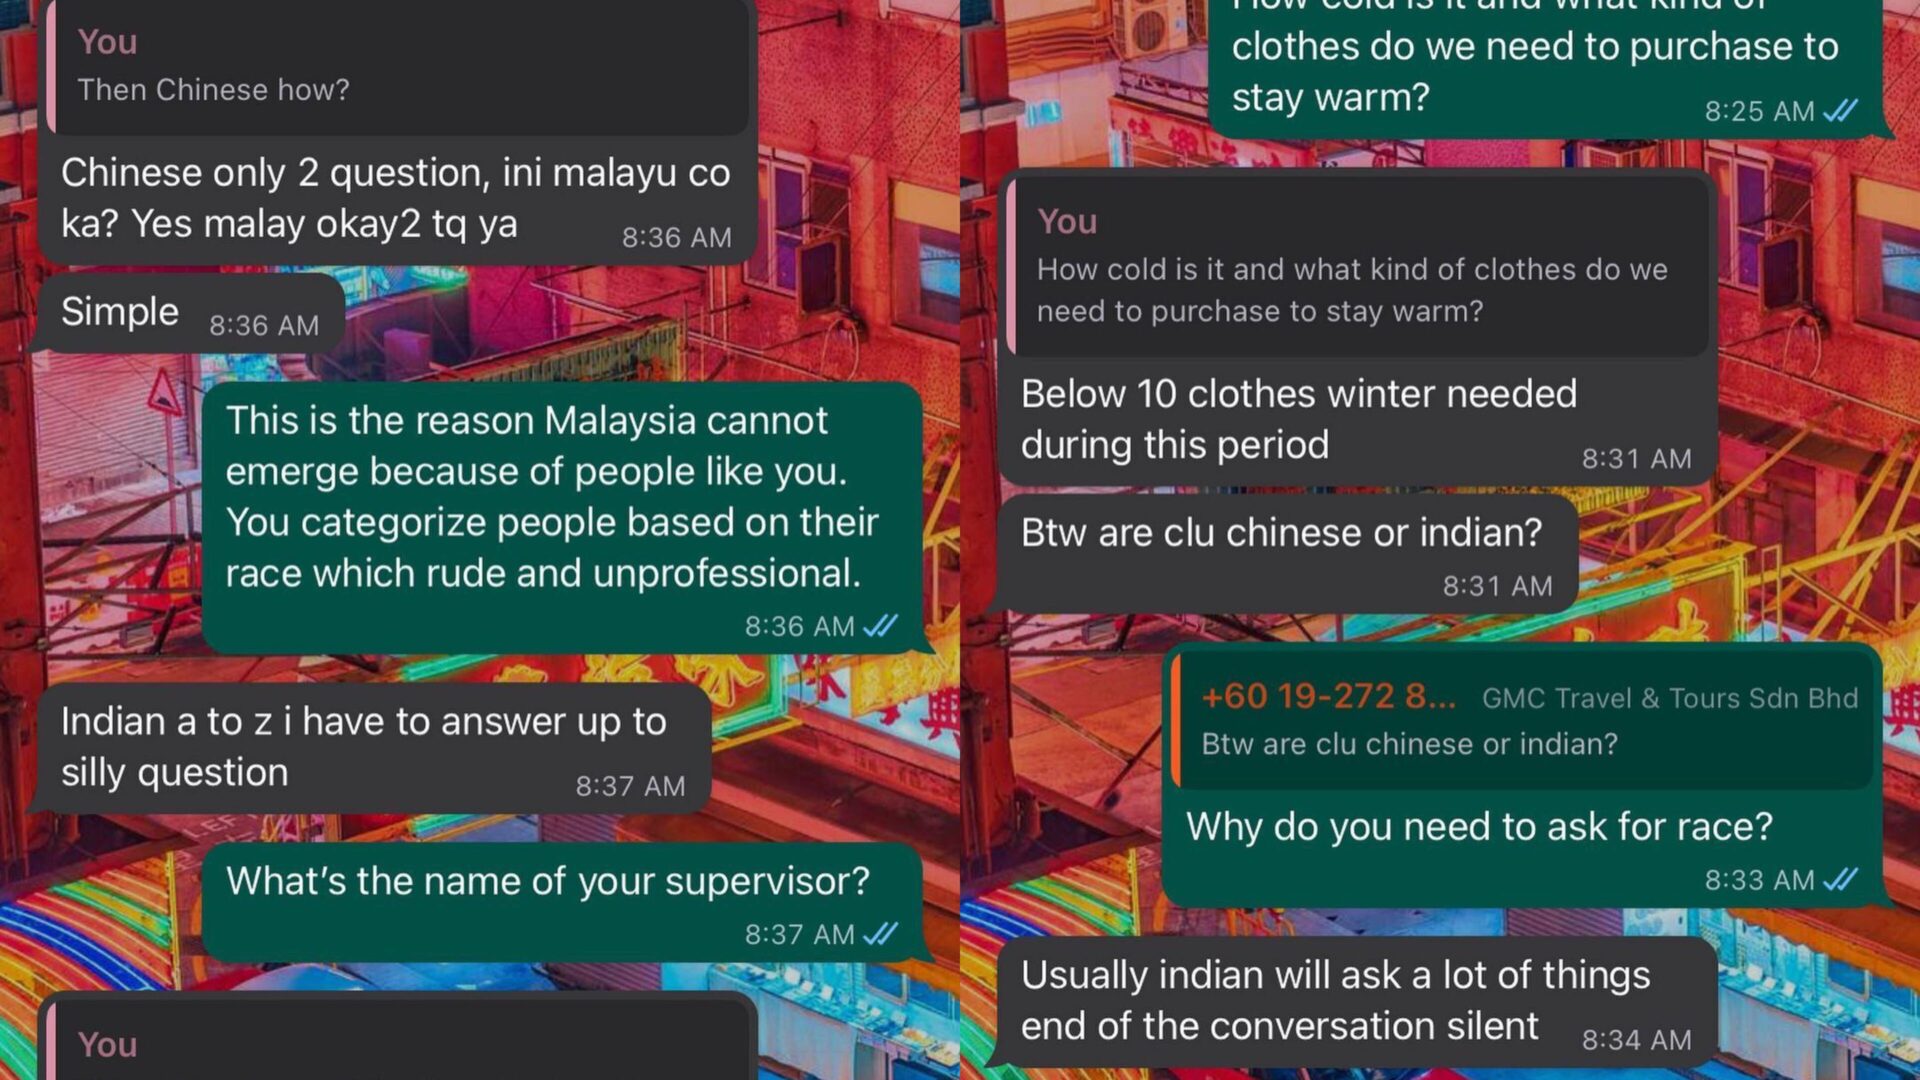 Unpack this: Malaysian woman gets racially profiled by travel agency